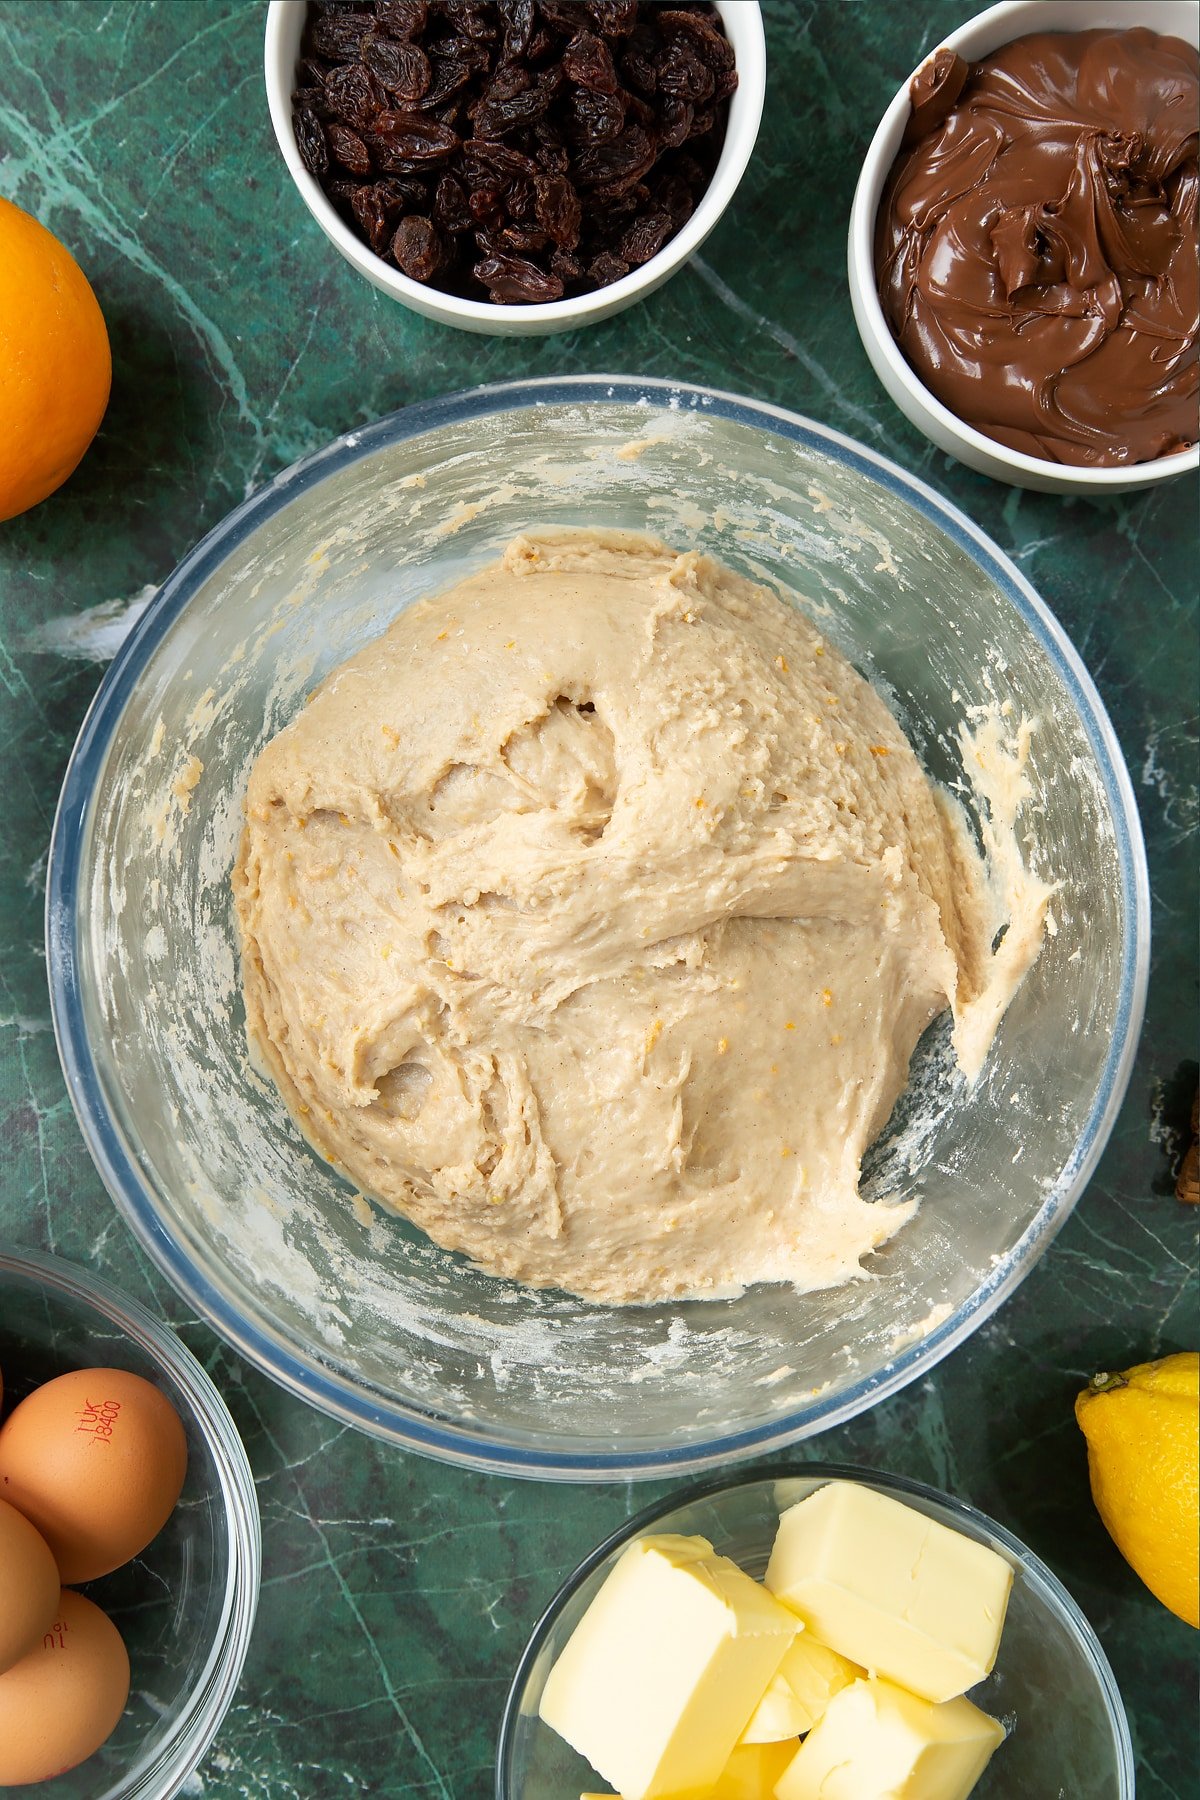 Kneaded spiced bread dough in a bowl. Ingredients to make Nutella panettone surround the bowl.